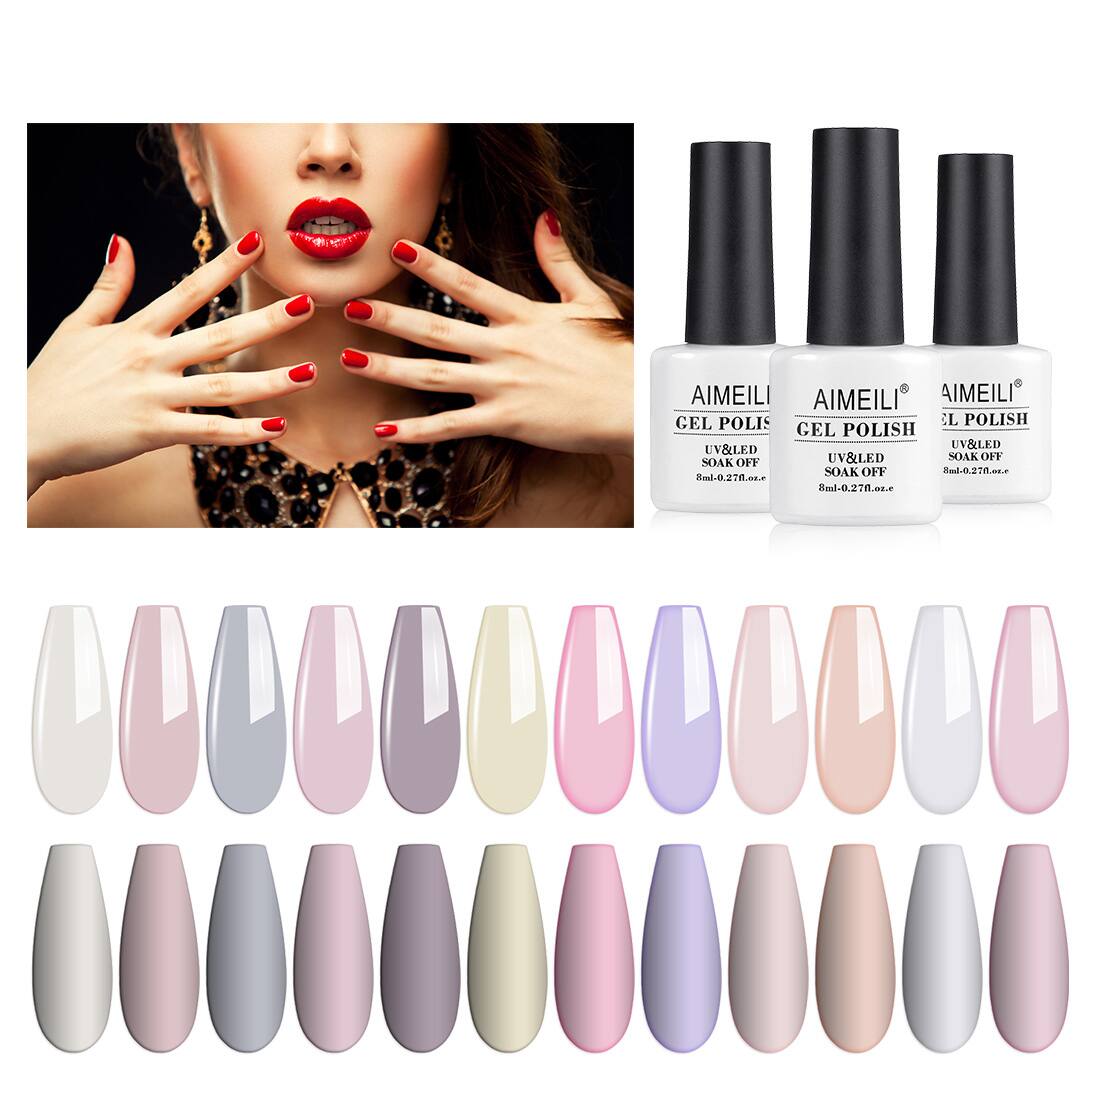 AIMEILI Clear Color Pink Nude Color Gel Nail Polish Set Of 12pcs for - $8.99 + Free Shipping w/ Amazon Prime or Orders $25+